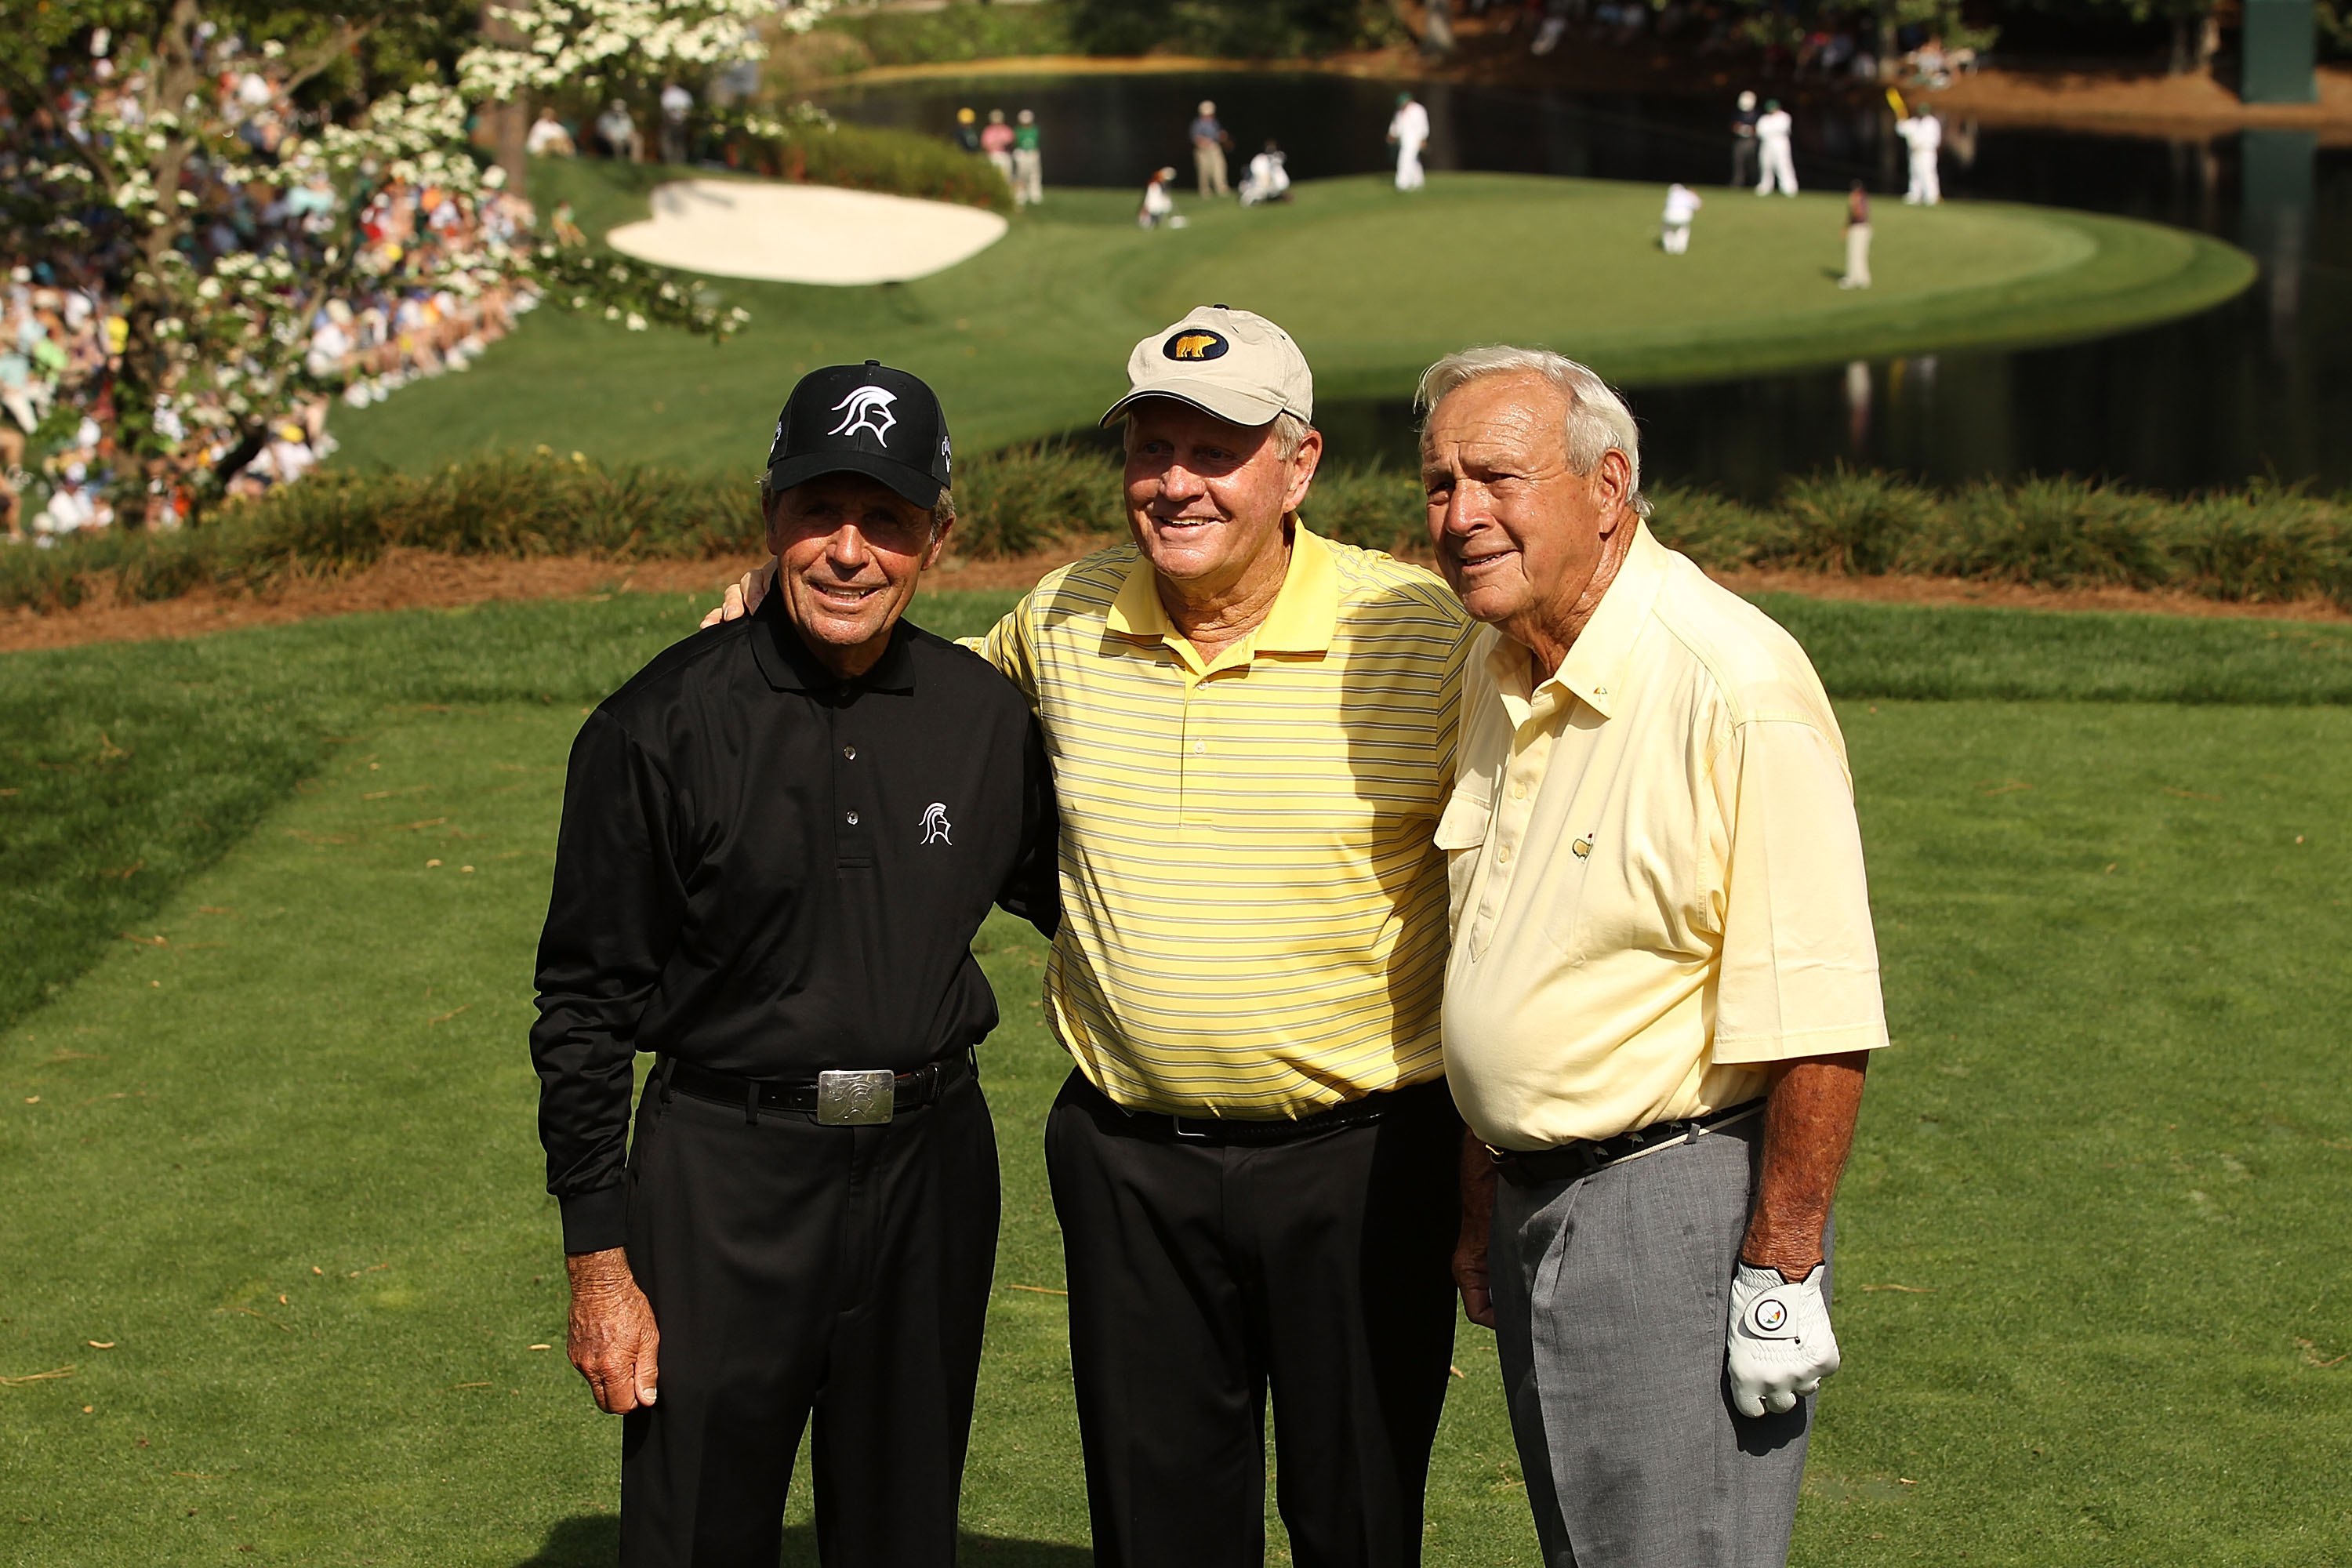 Player, Nicklaus and Palmer, The Big Three at Augusta National